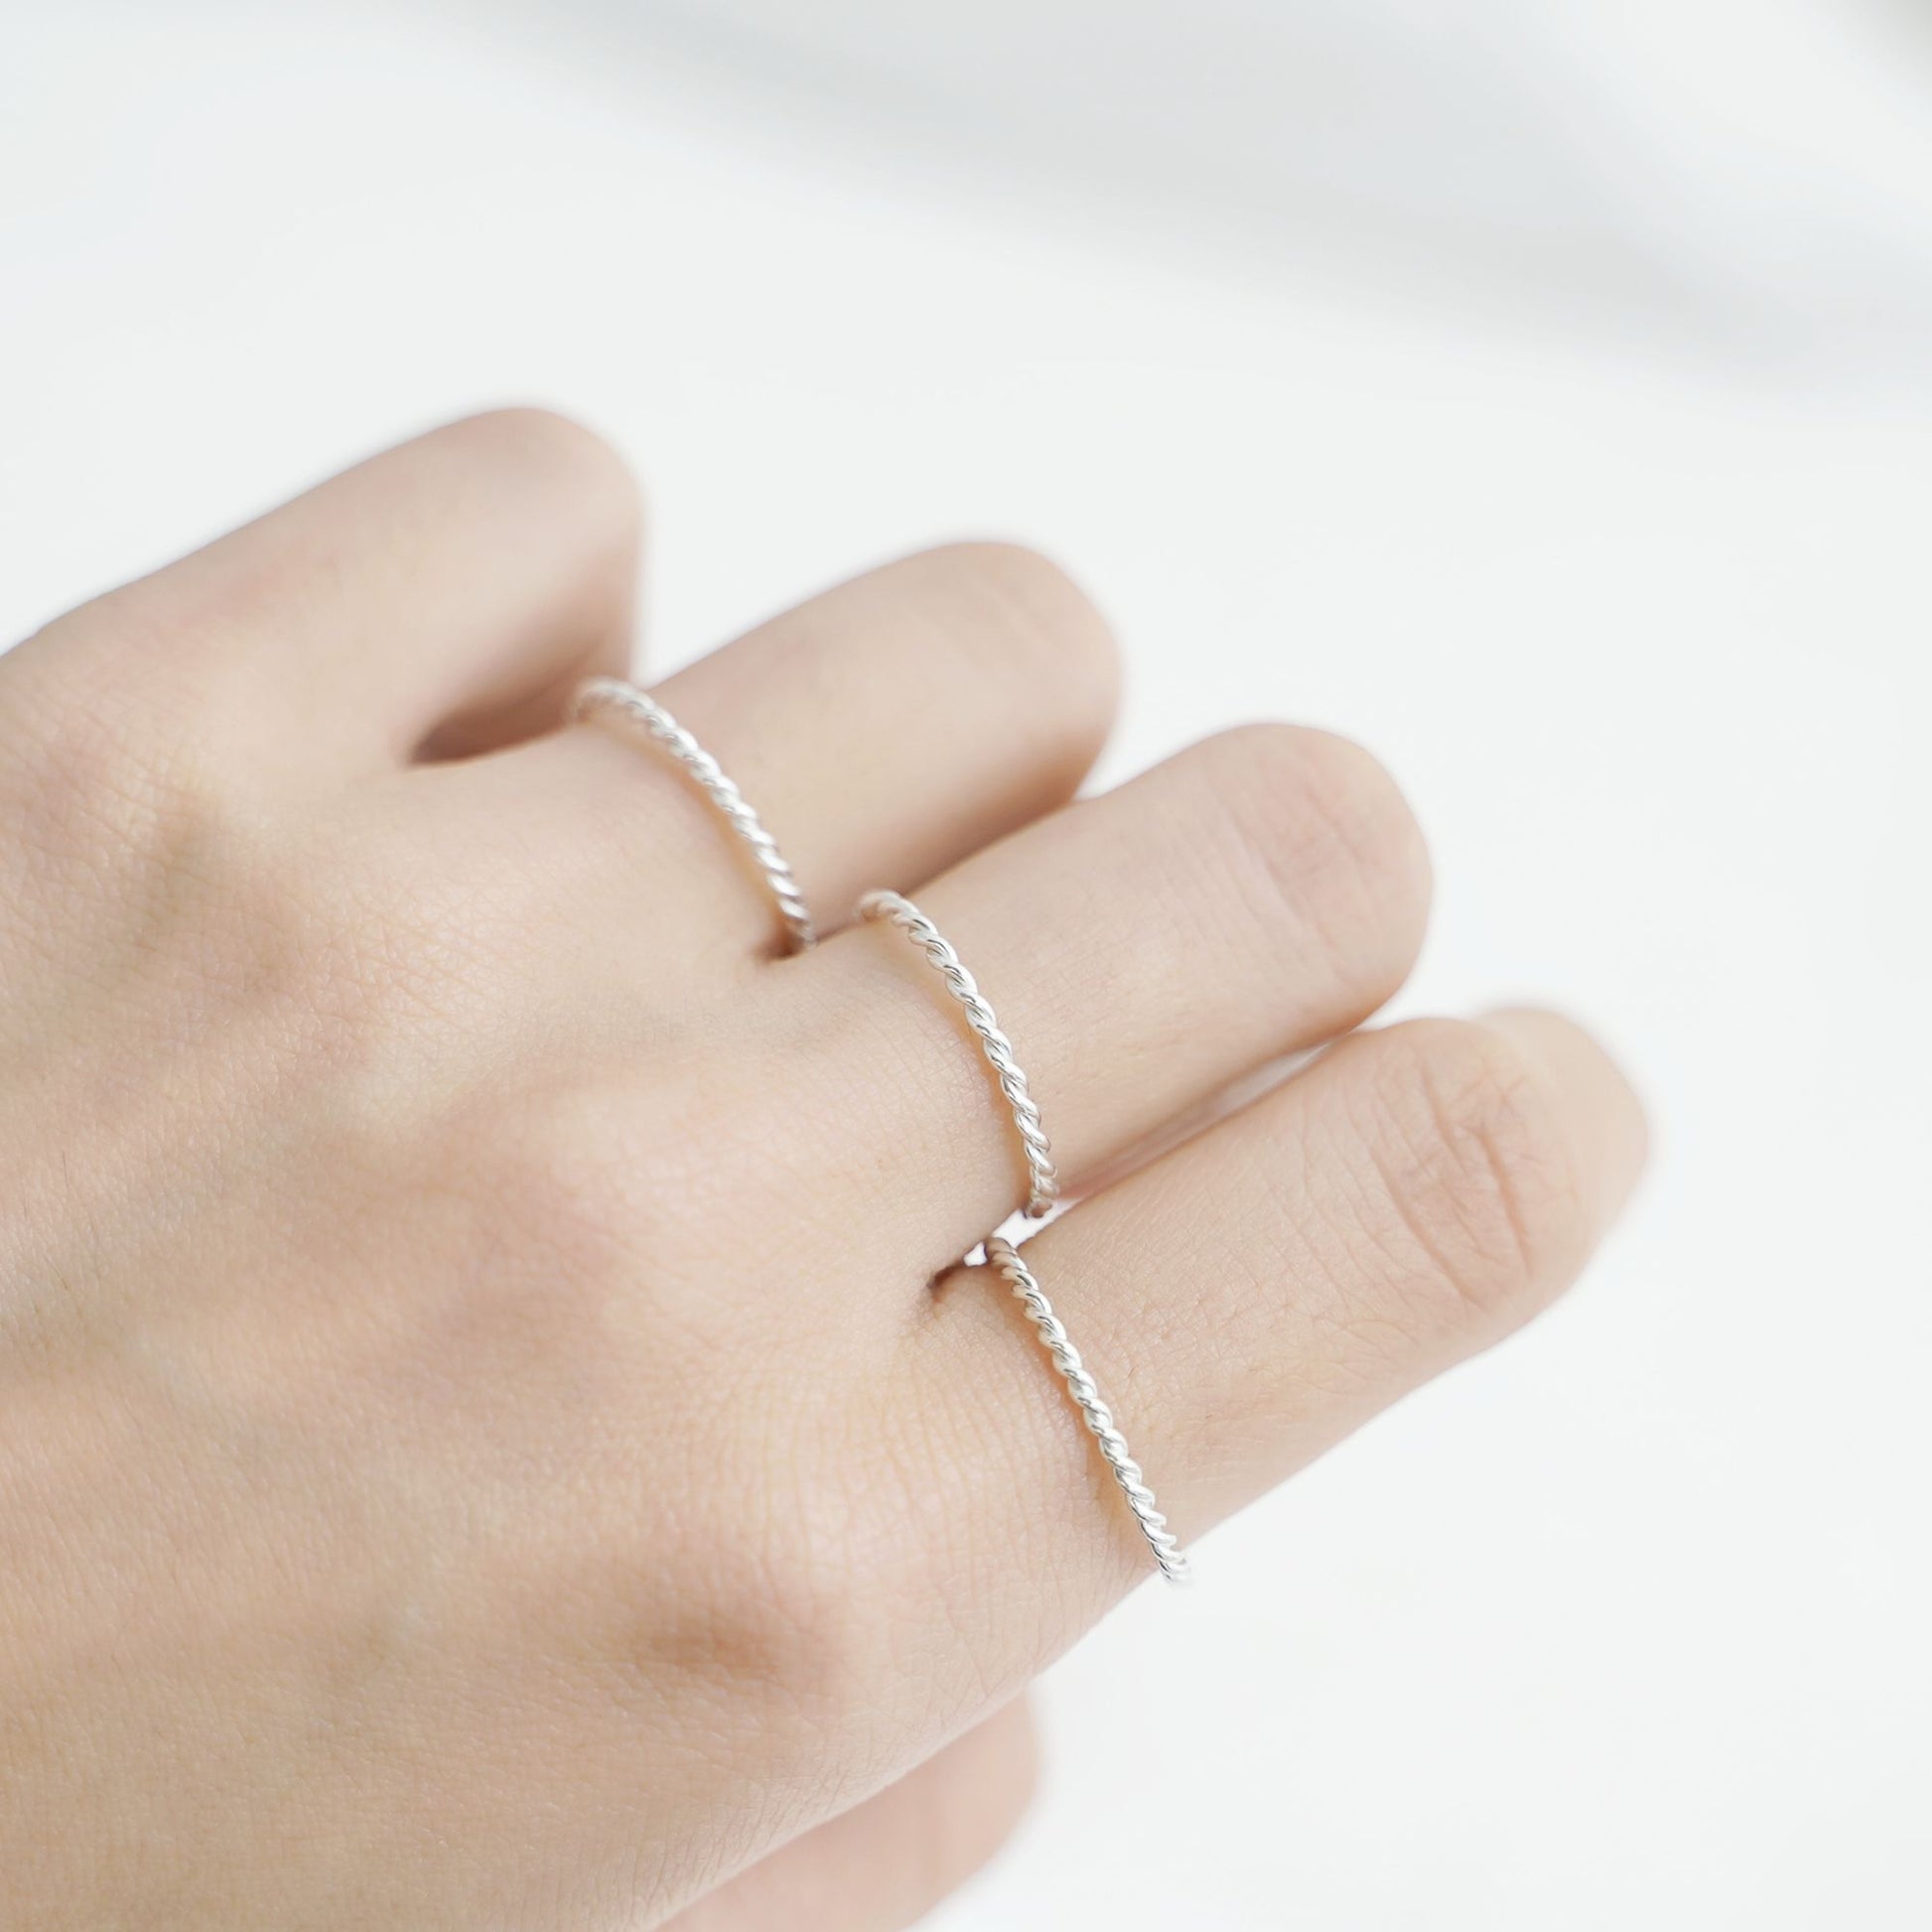 1.2 - 1.4mm Sterling Silver Simple Twisted Spiral Band Stacking Ring E1/2 - T - sugarkittenlondon